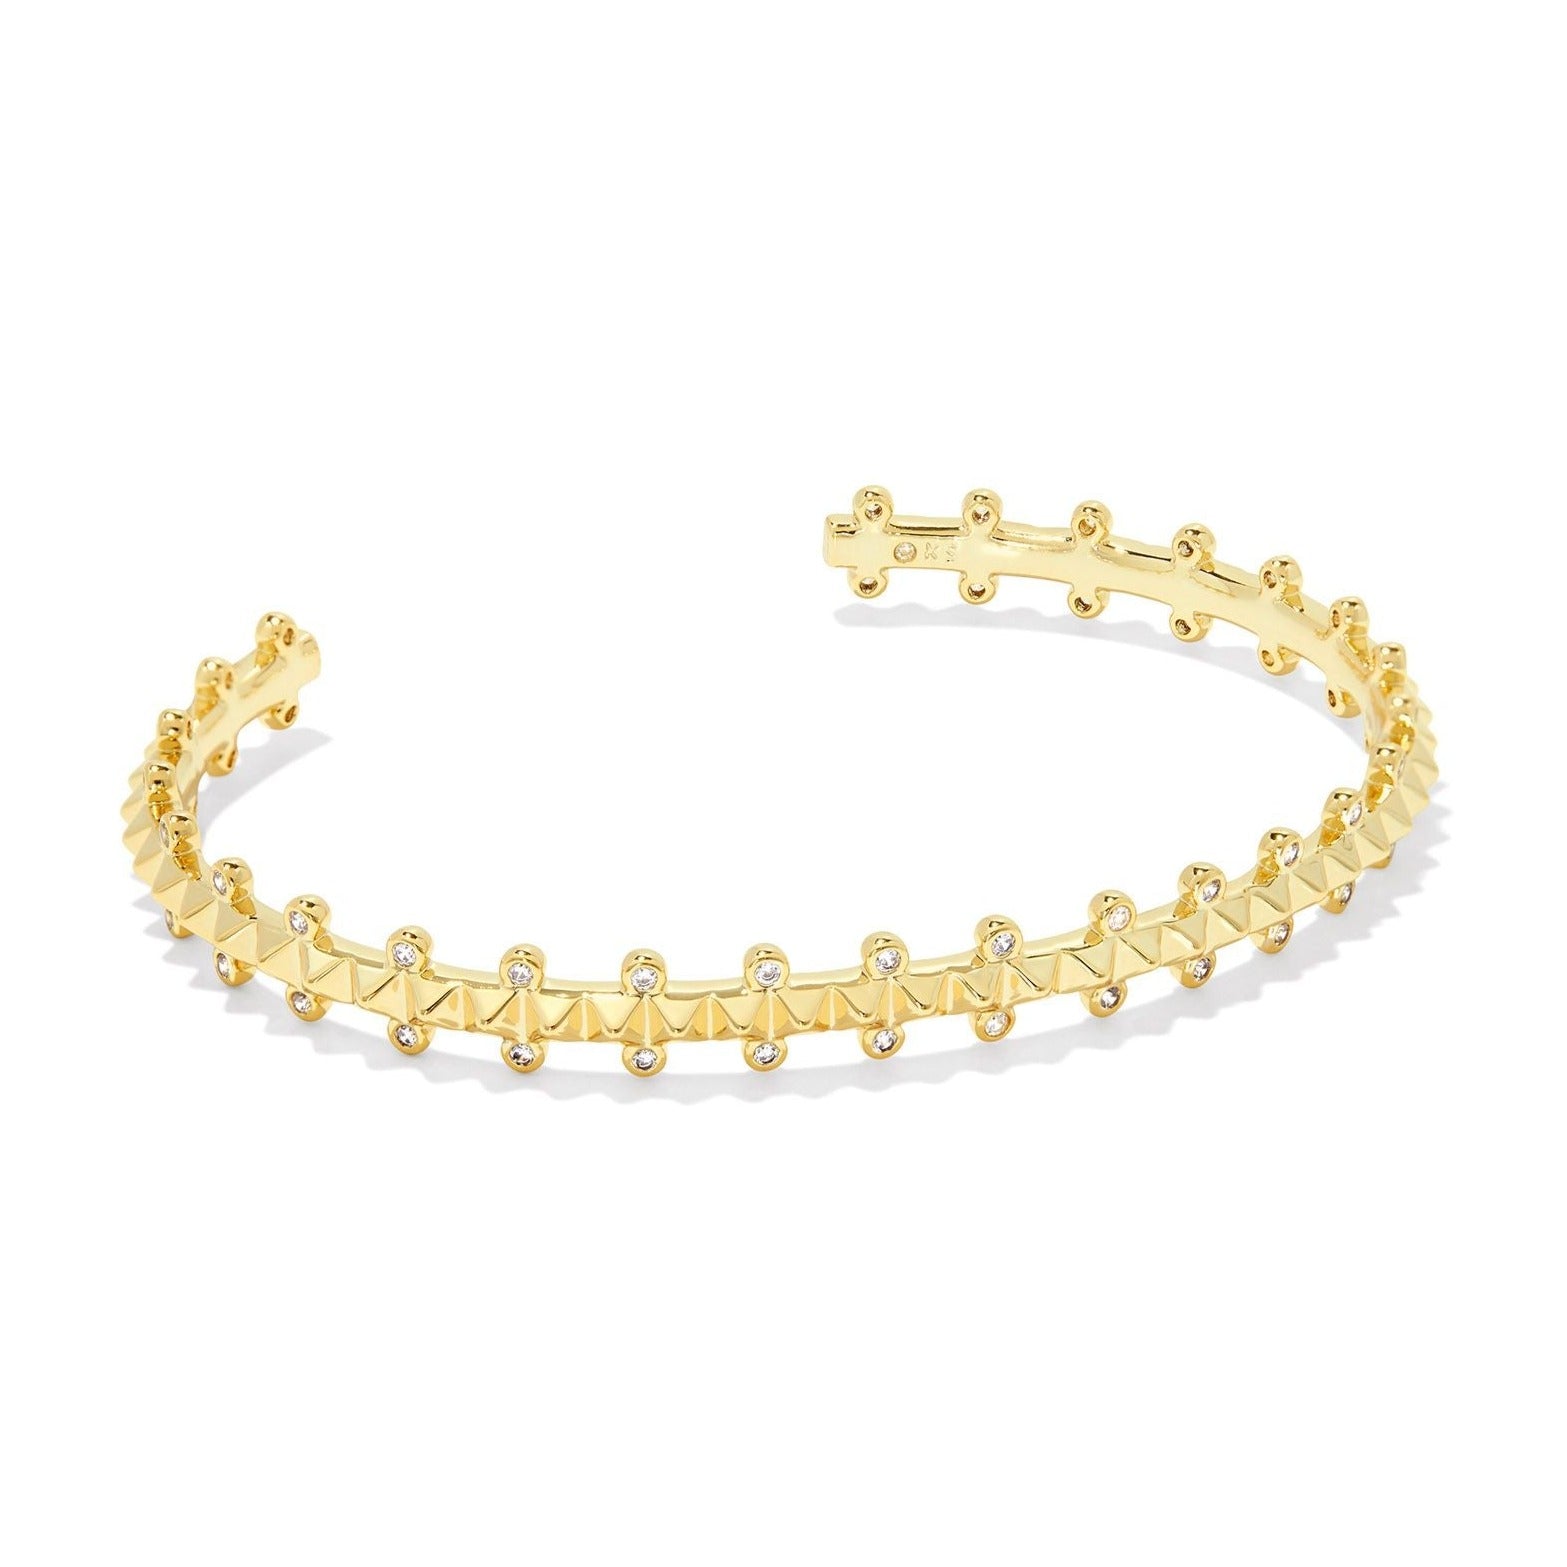 Kendra Scott | Jada Gold Cuff Bracelet in White Crystal - Giddy Up Glamour Boutique